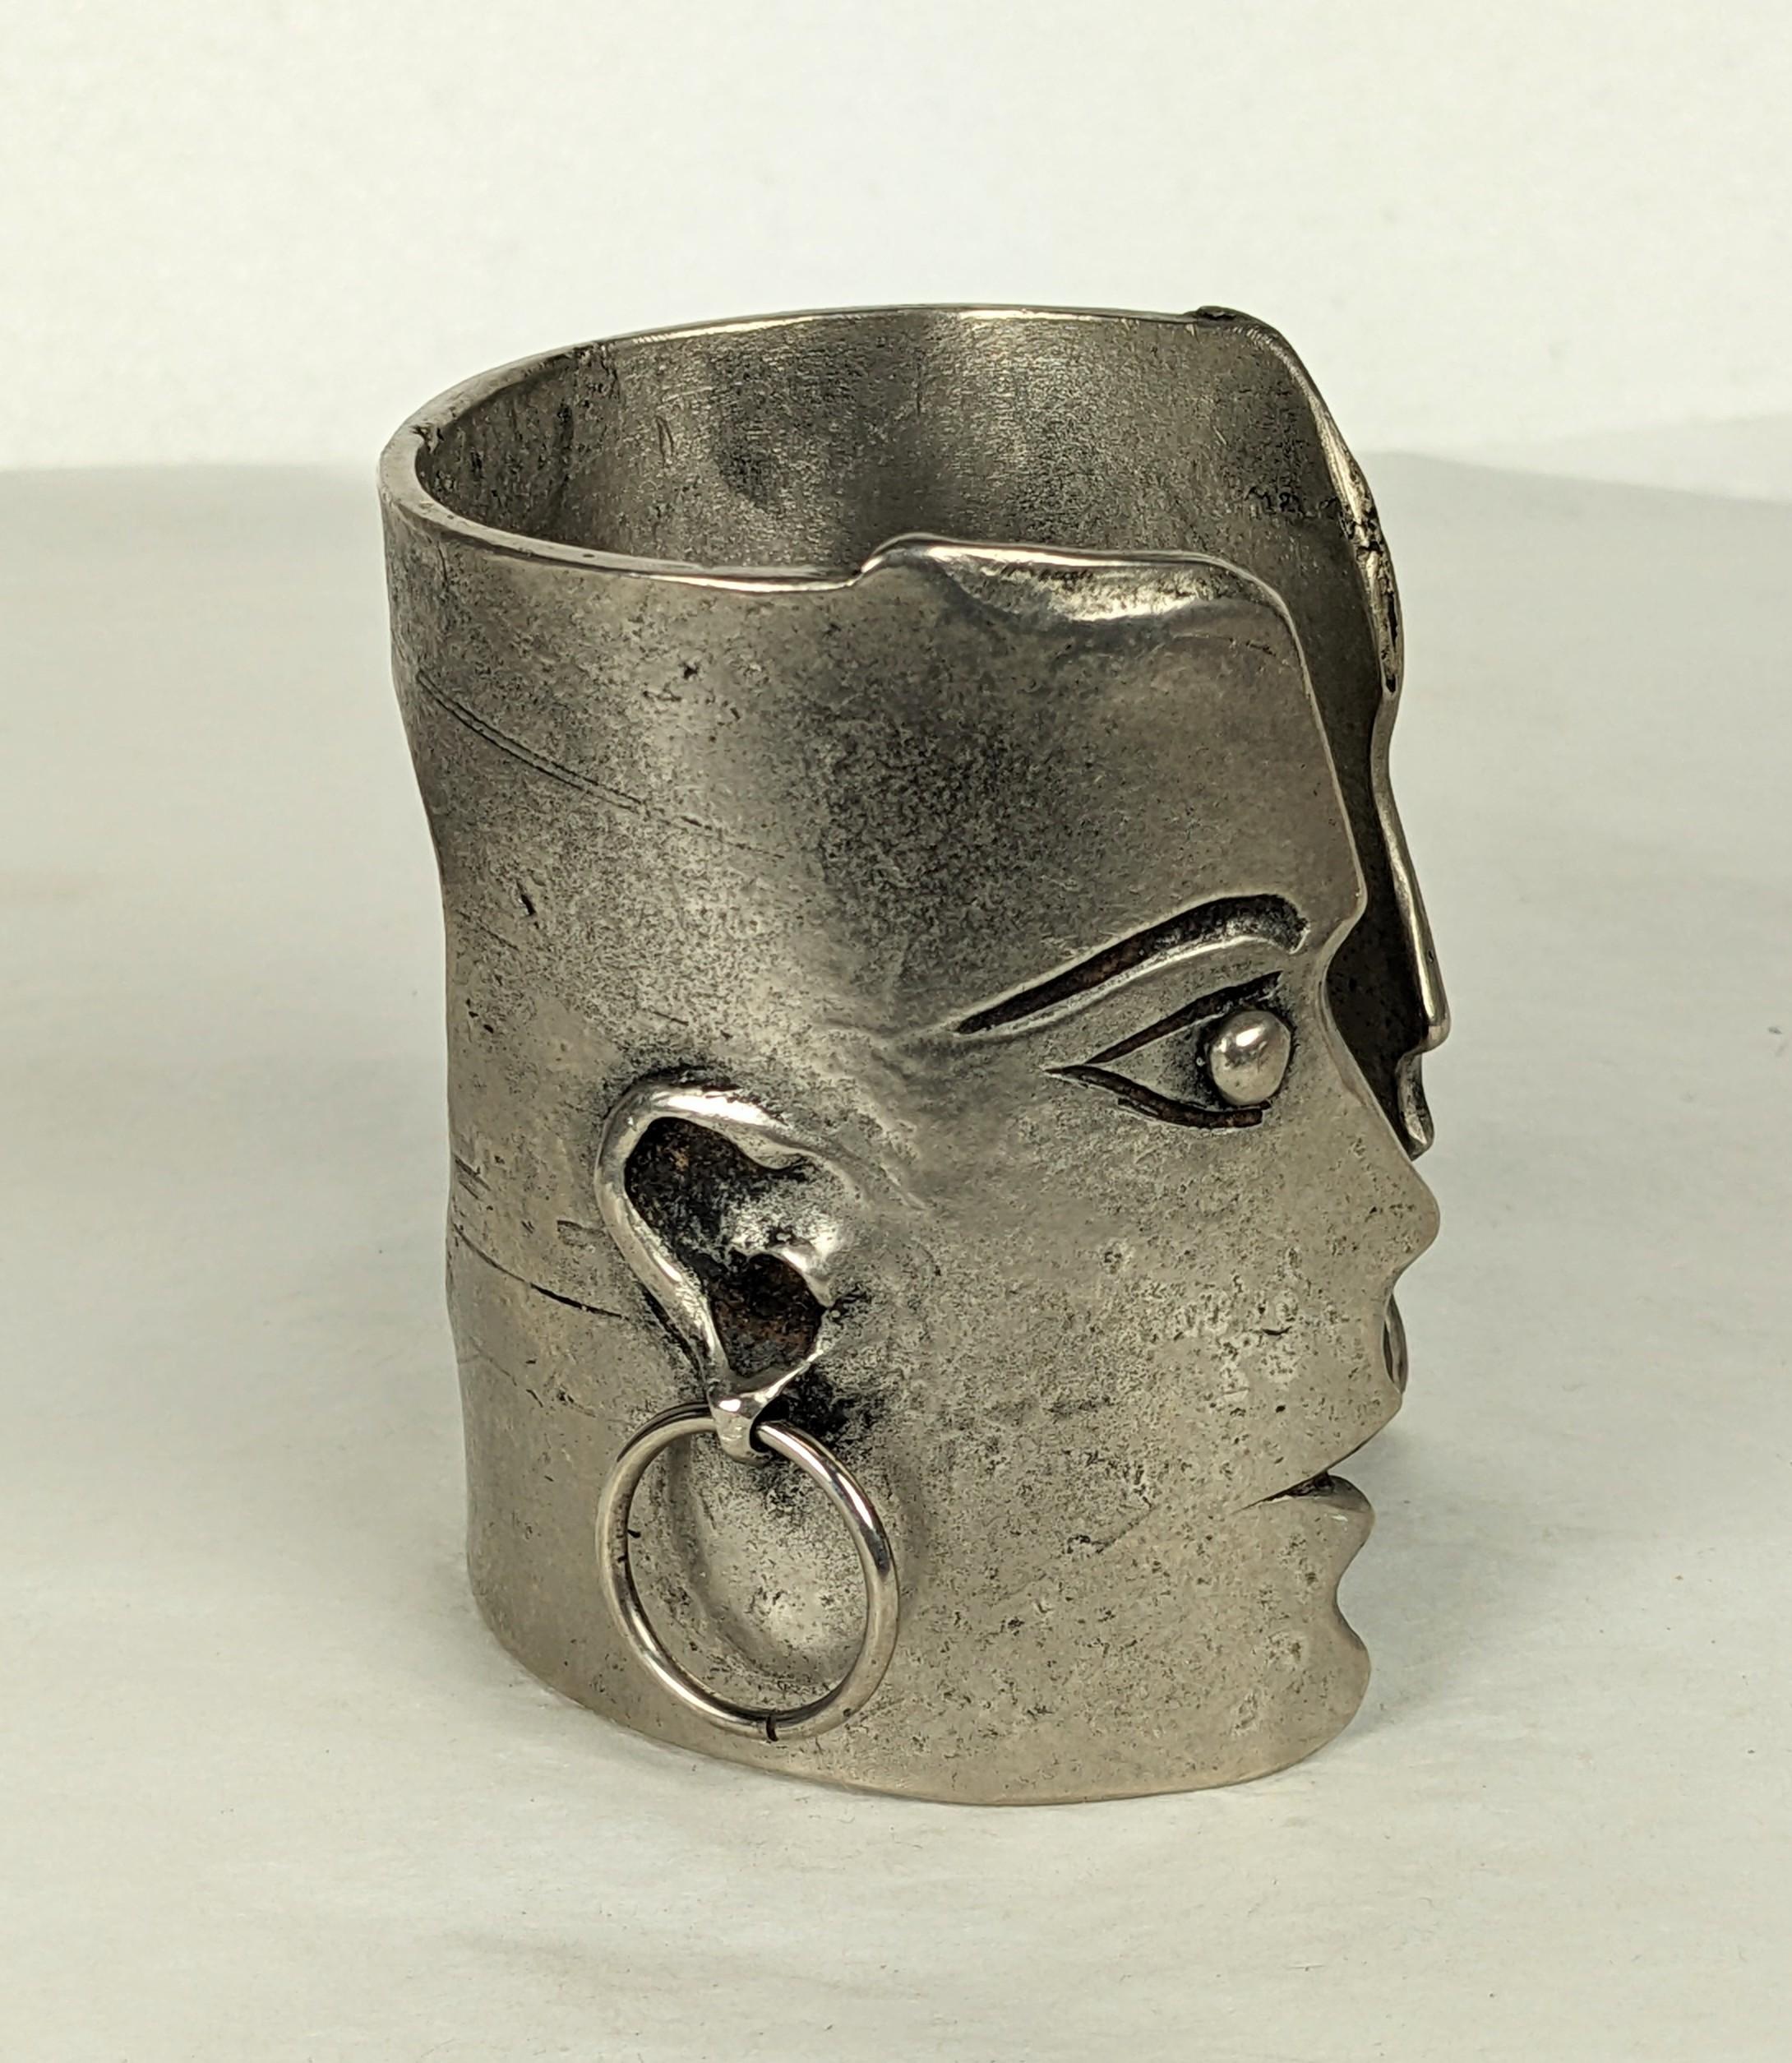 Rare Jean Charles de Castelbajac Figural Cuff  In Excellent Condition For Sale In New York, NY